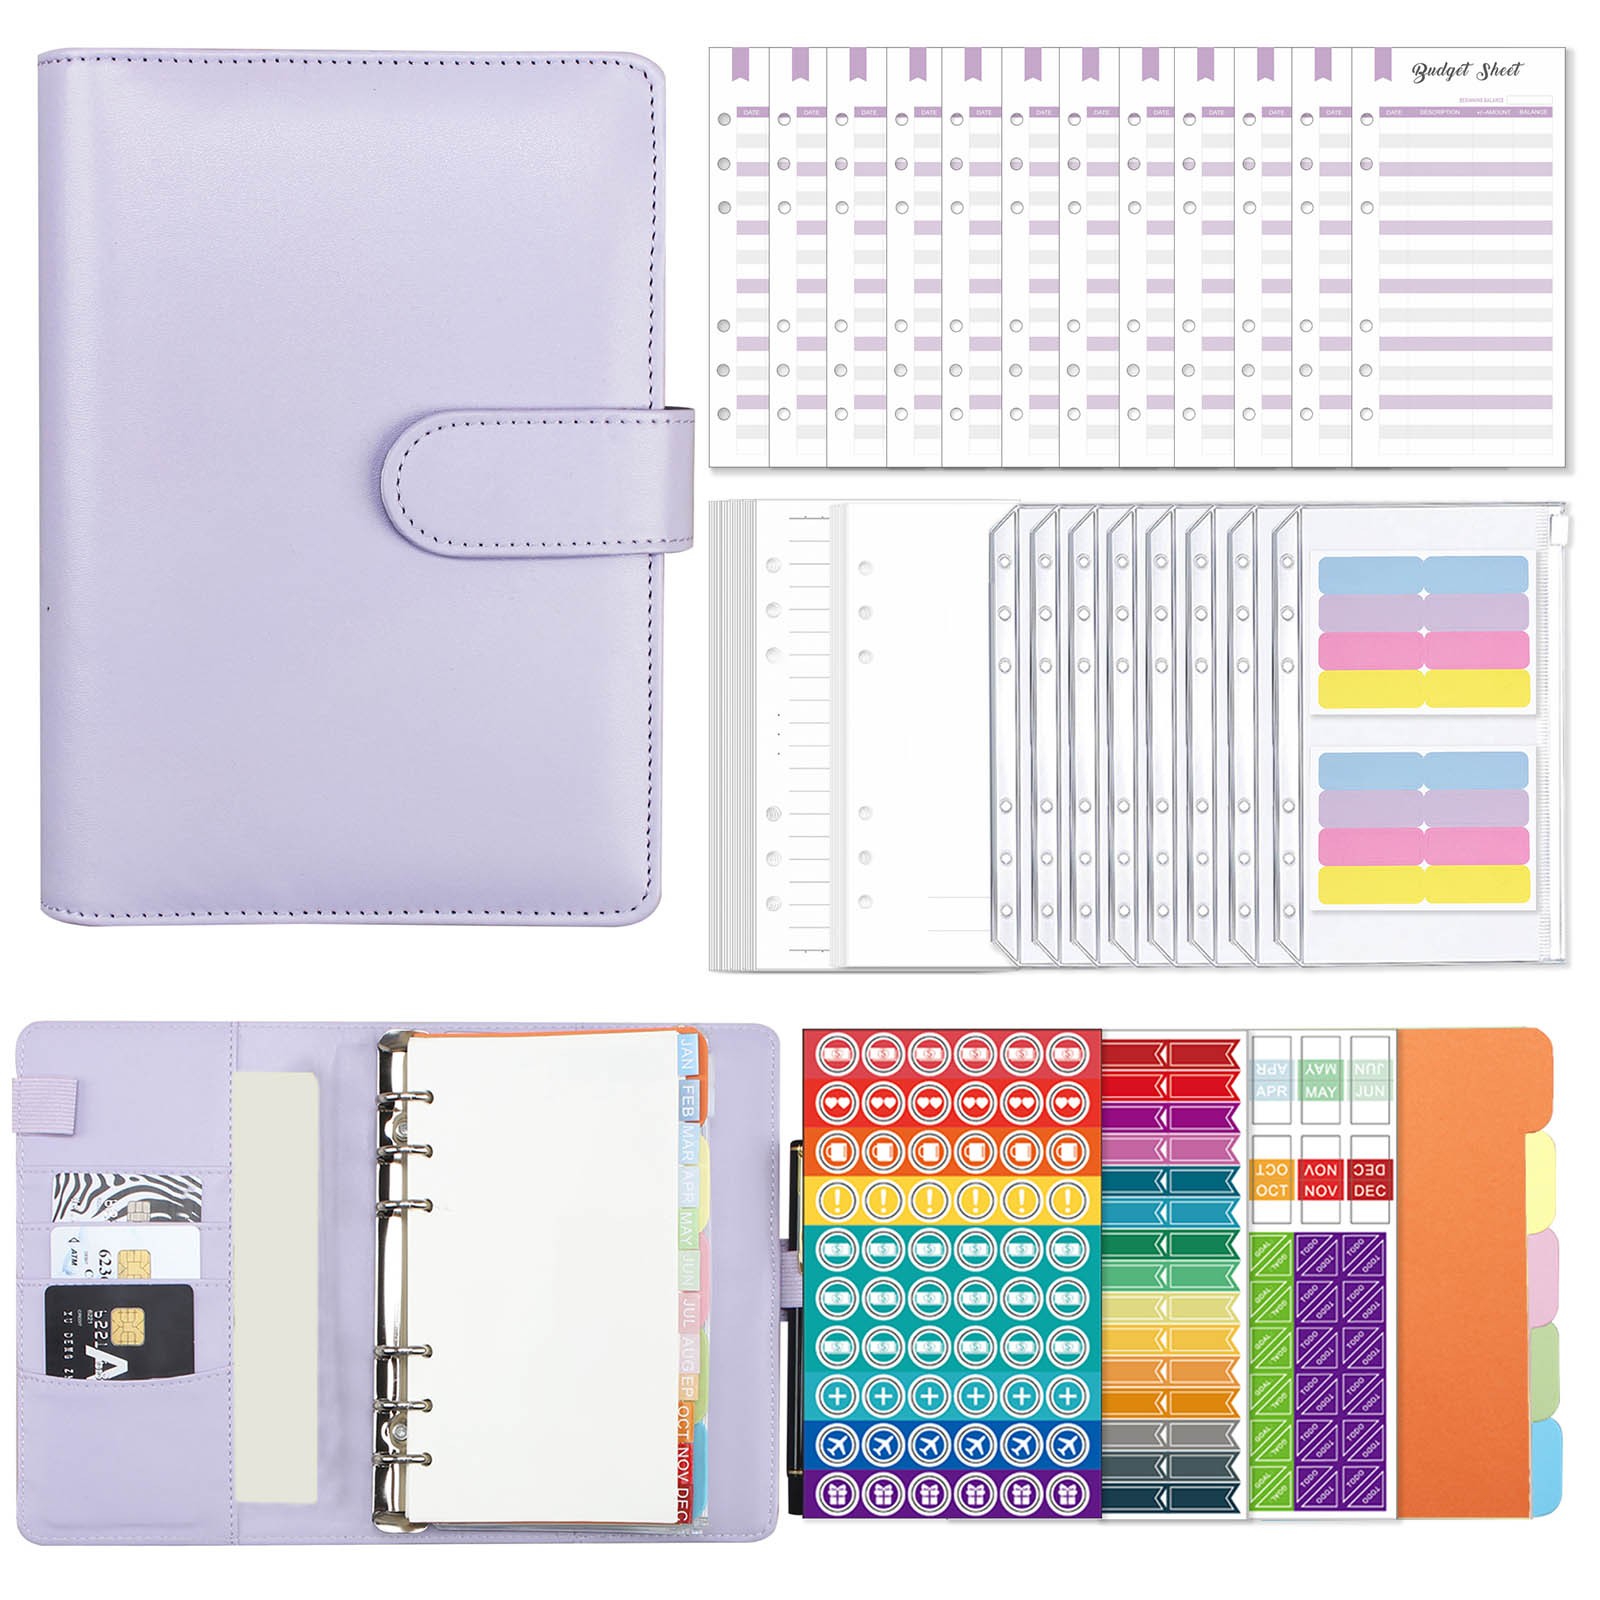 COFEST Planner Weekly Planner Monthly Planner,Undated Budget And  Ledger,Financial Planning Log,Goal Recording Notebook,Planner For Home  Office A6 Size Purple 